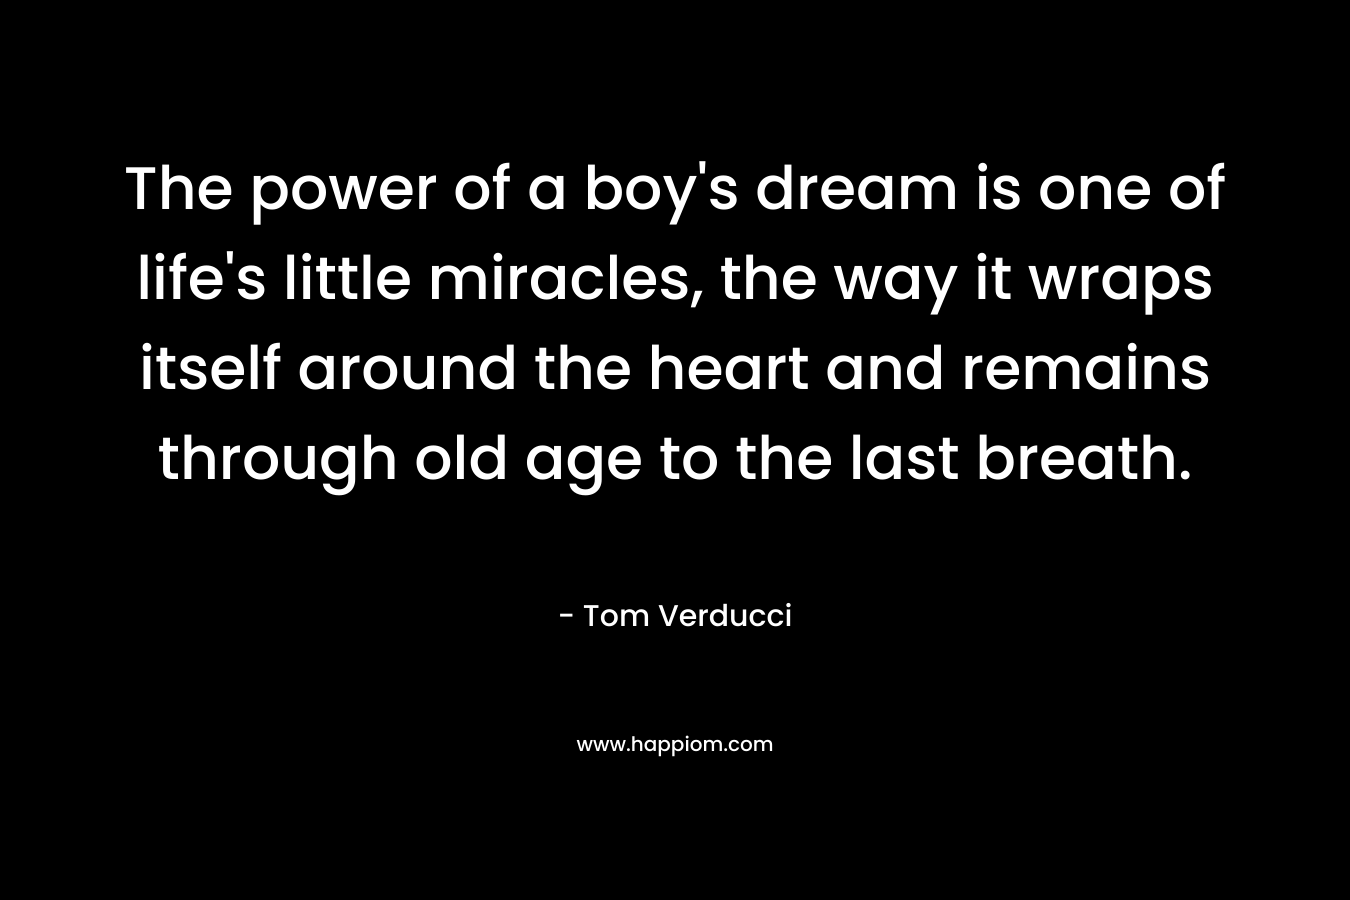 The power of a boy's dream is one of life's little miracles, the way it wraps itself around the heart and remains through old age to the last breath.